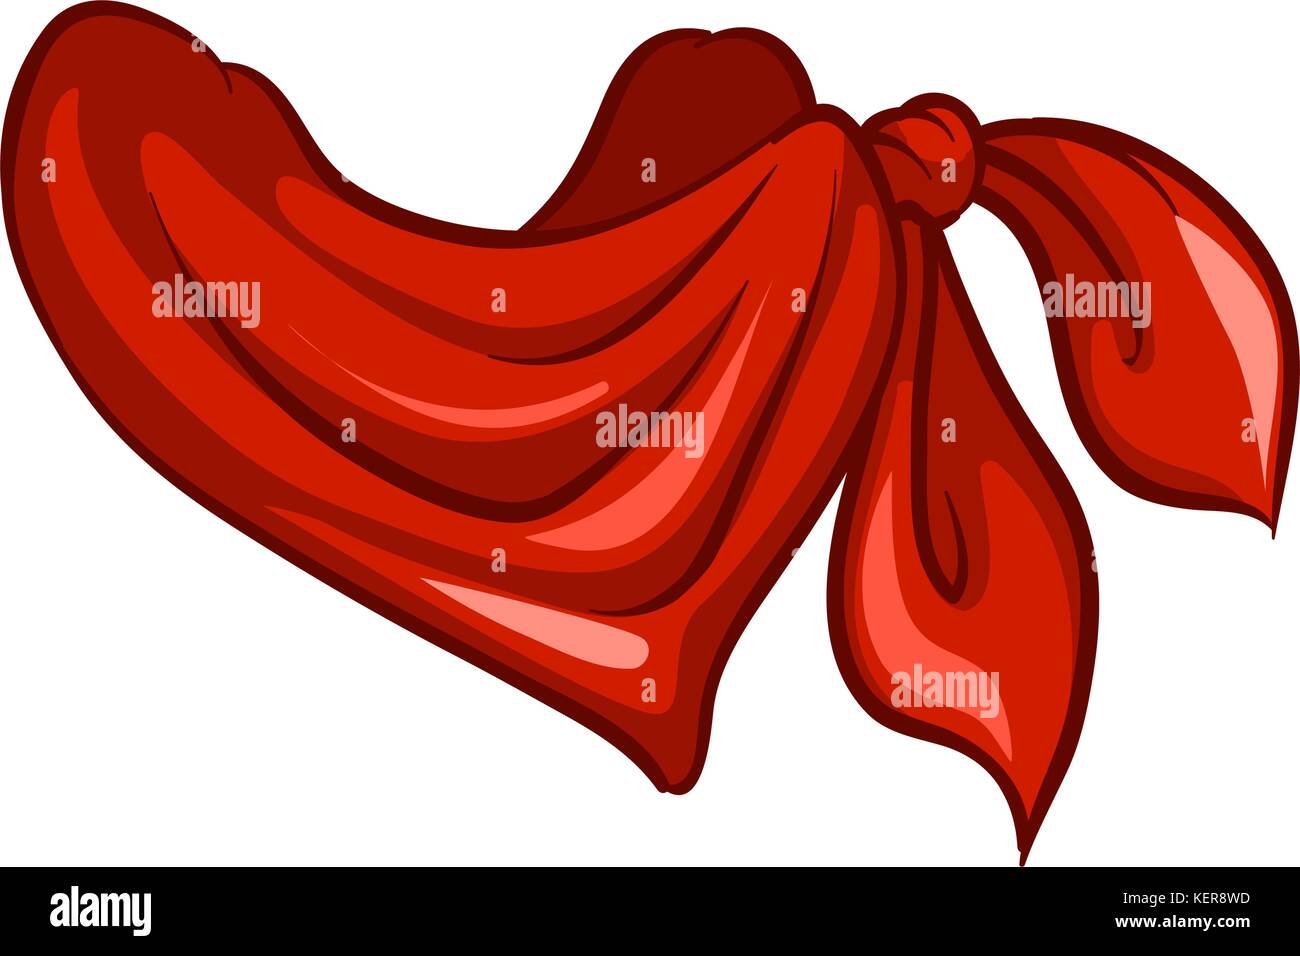 Illustration of a red scarf on a white background Stock Vector